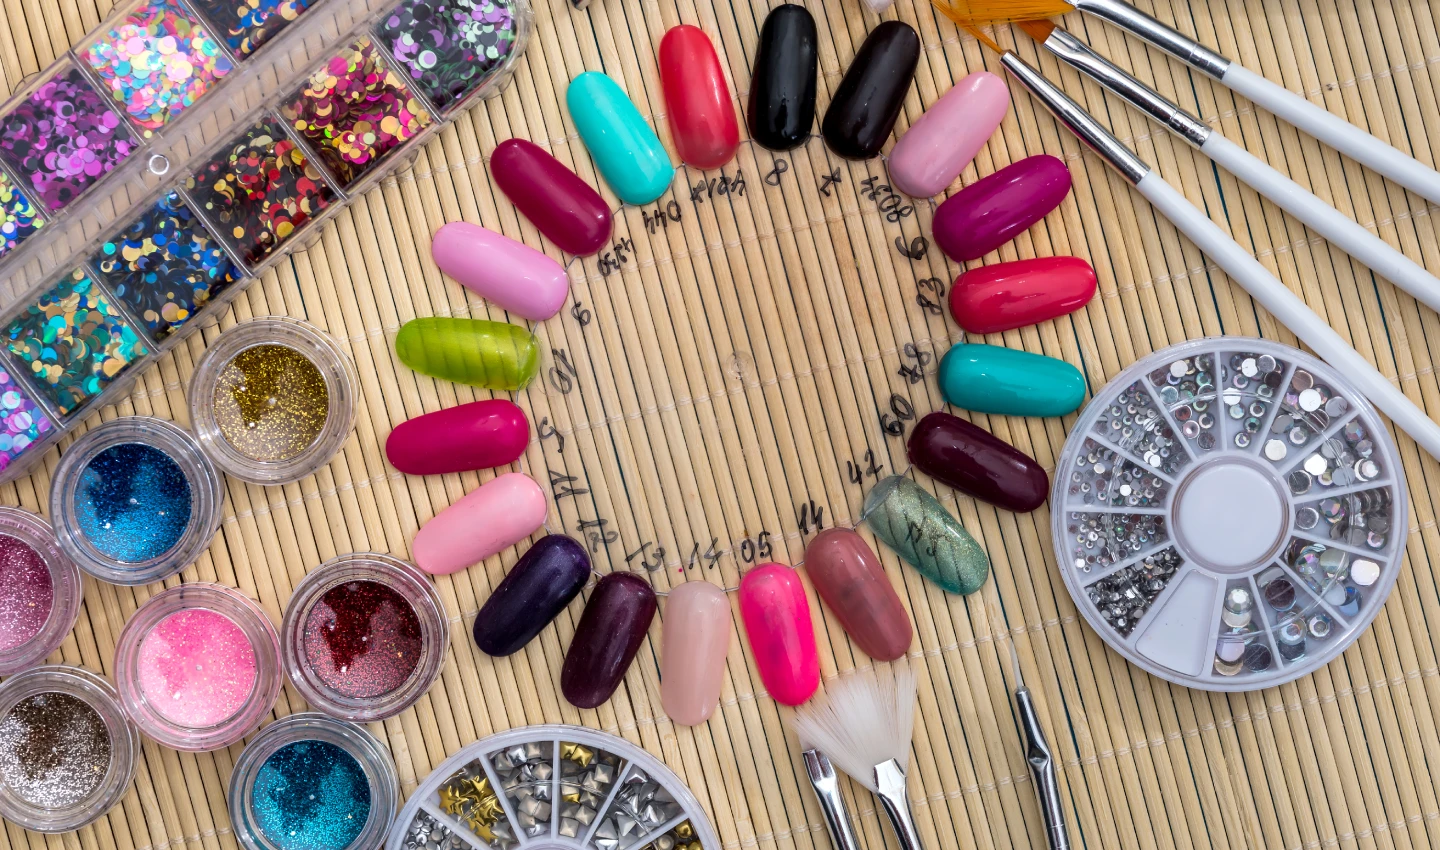 Image of different coloured nails with intricate designs created using trendy nail art accessories like brushes, stencils, gems, stickers, and marbling tools.